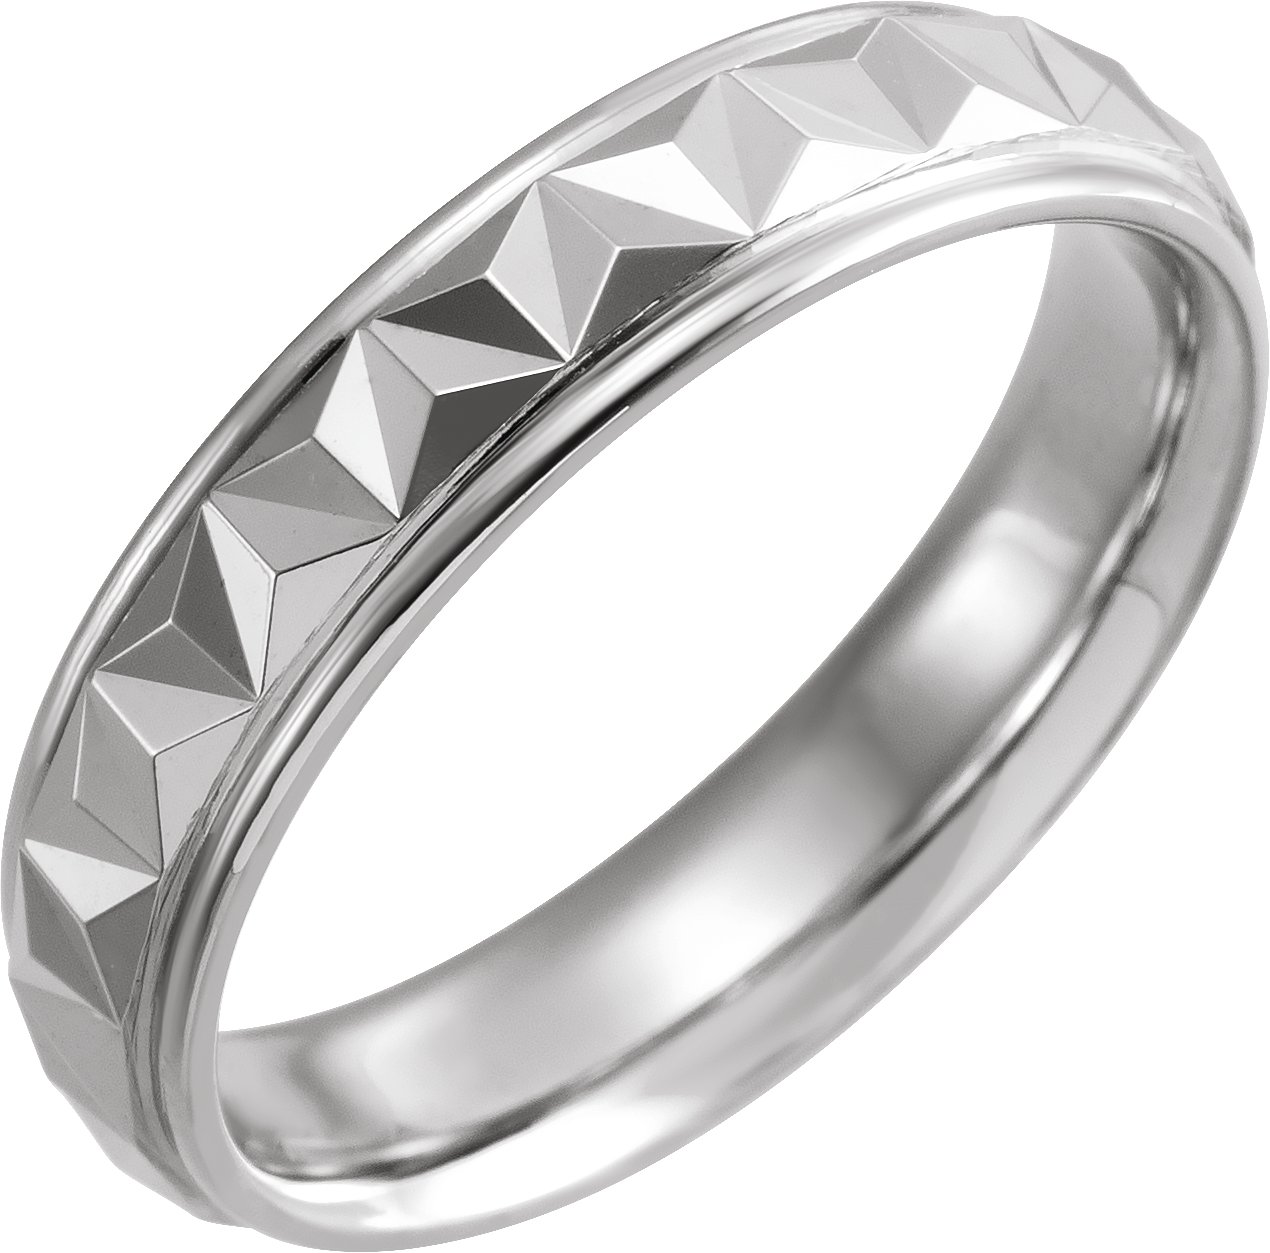 Sterling Silver 5 mm Geometric Band with Polished Finish Size 14.5